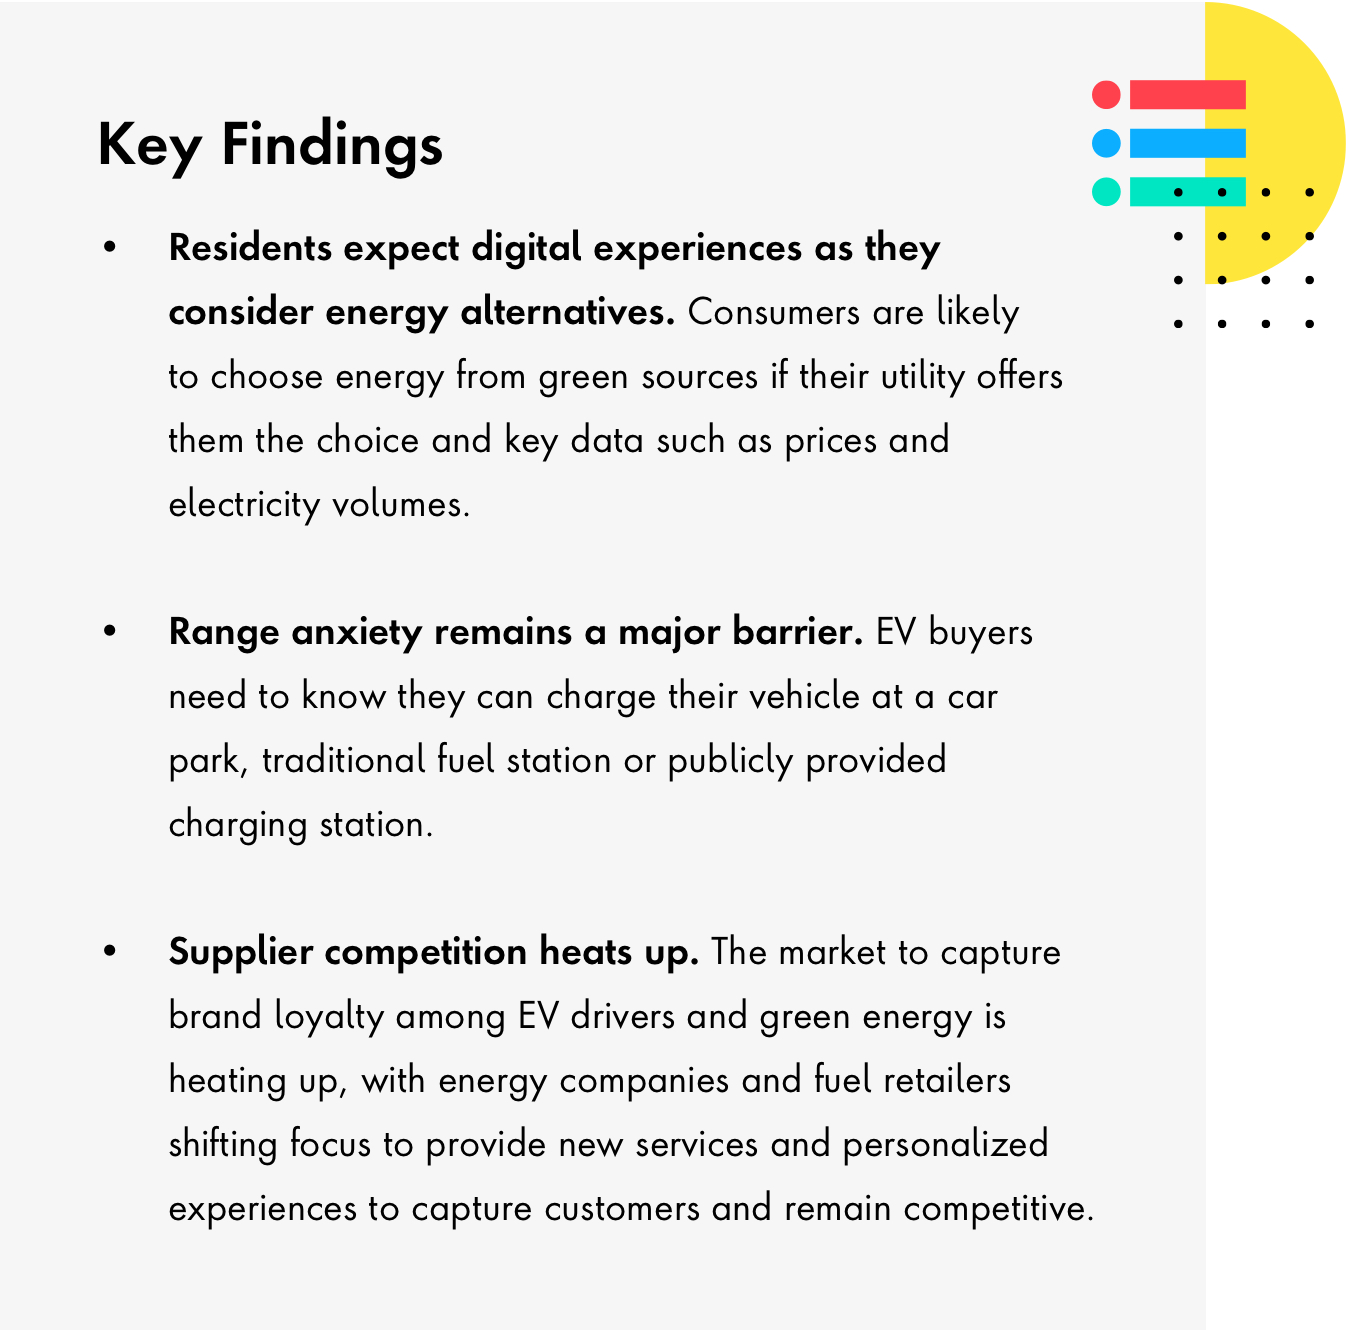 Three key findings indicating residents expect digital experiences as they consider energy alternatives, range anxiety remains a major barrier for potential EV buyers, and that competiion is heating up to capture brand loyalty for EV drivers and green energy buyers, shifting focus for new experiences and services.